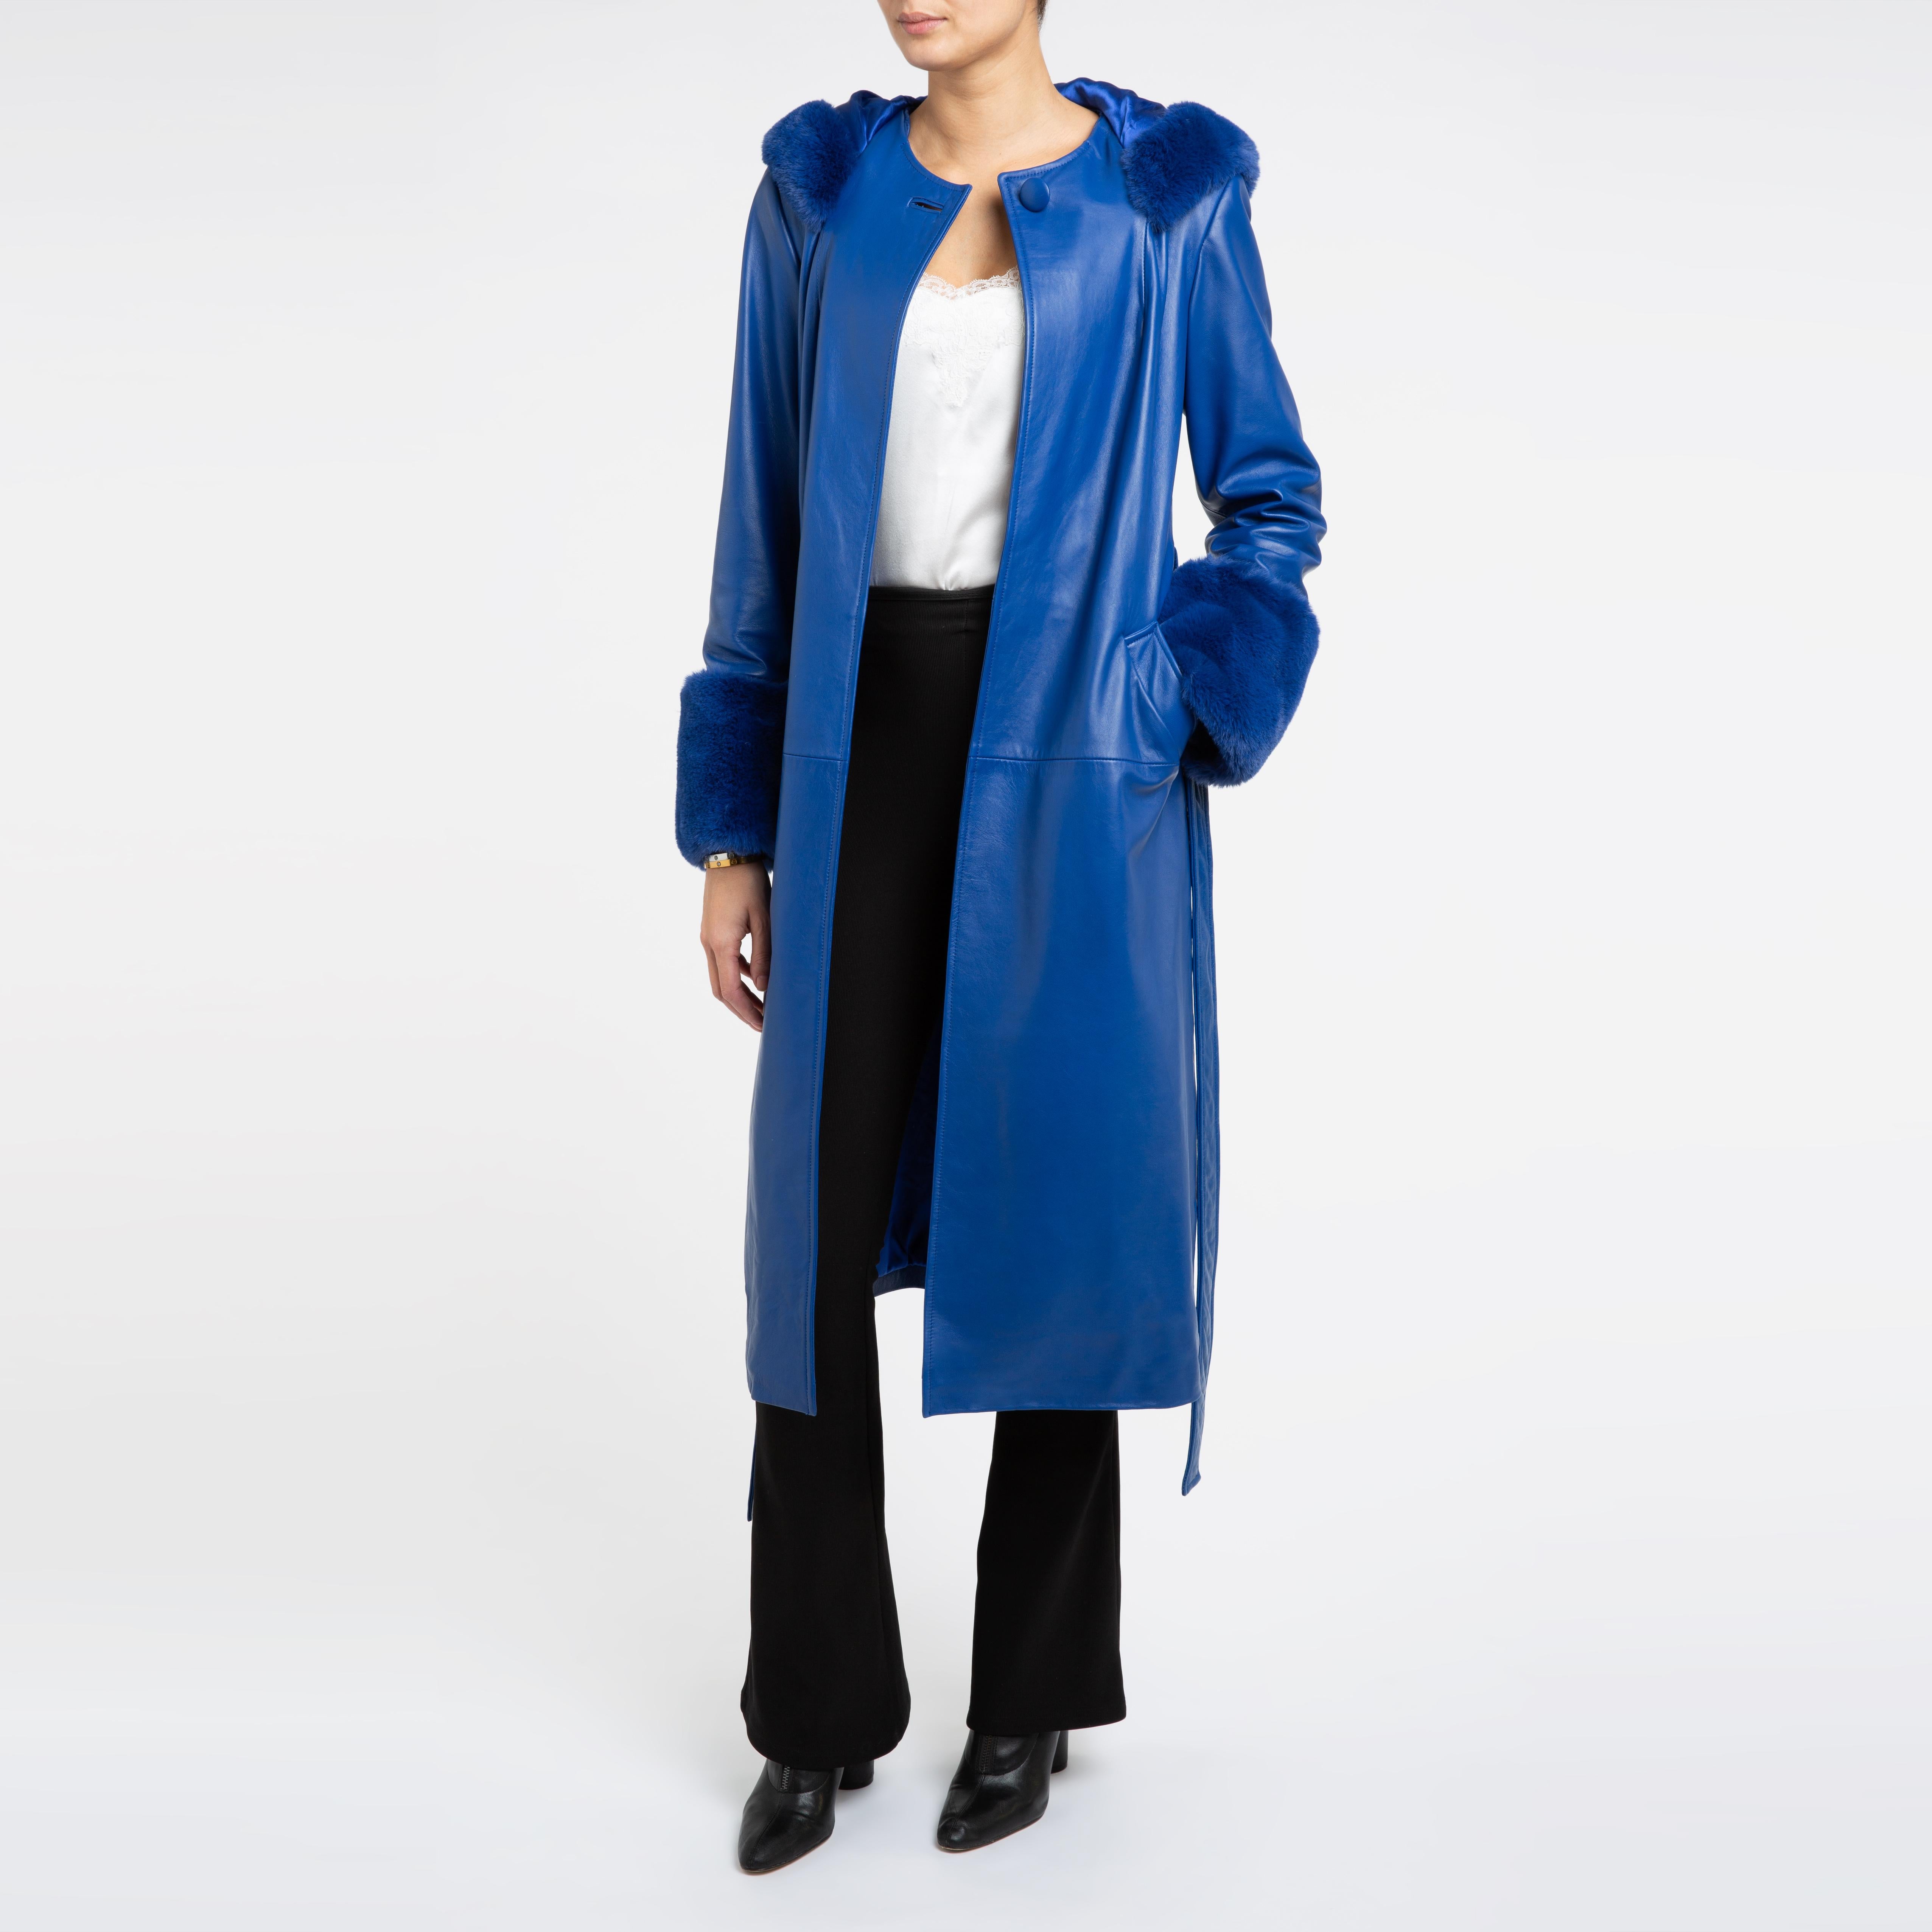 Verheyen London Hooded Leather Trench Coat in Blue with Faux Fur - Size uk 8  1